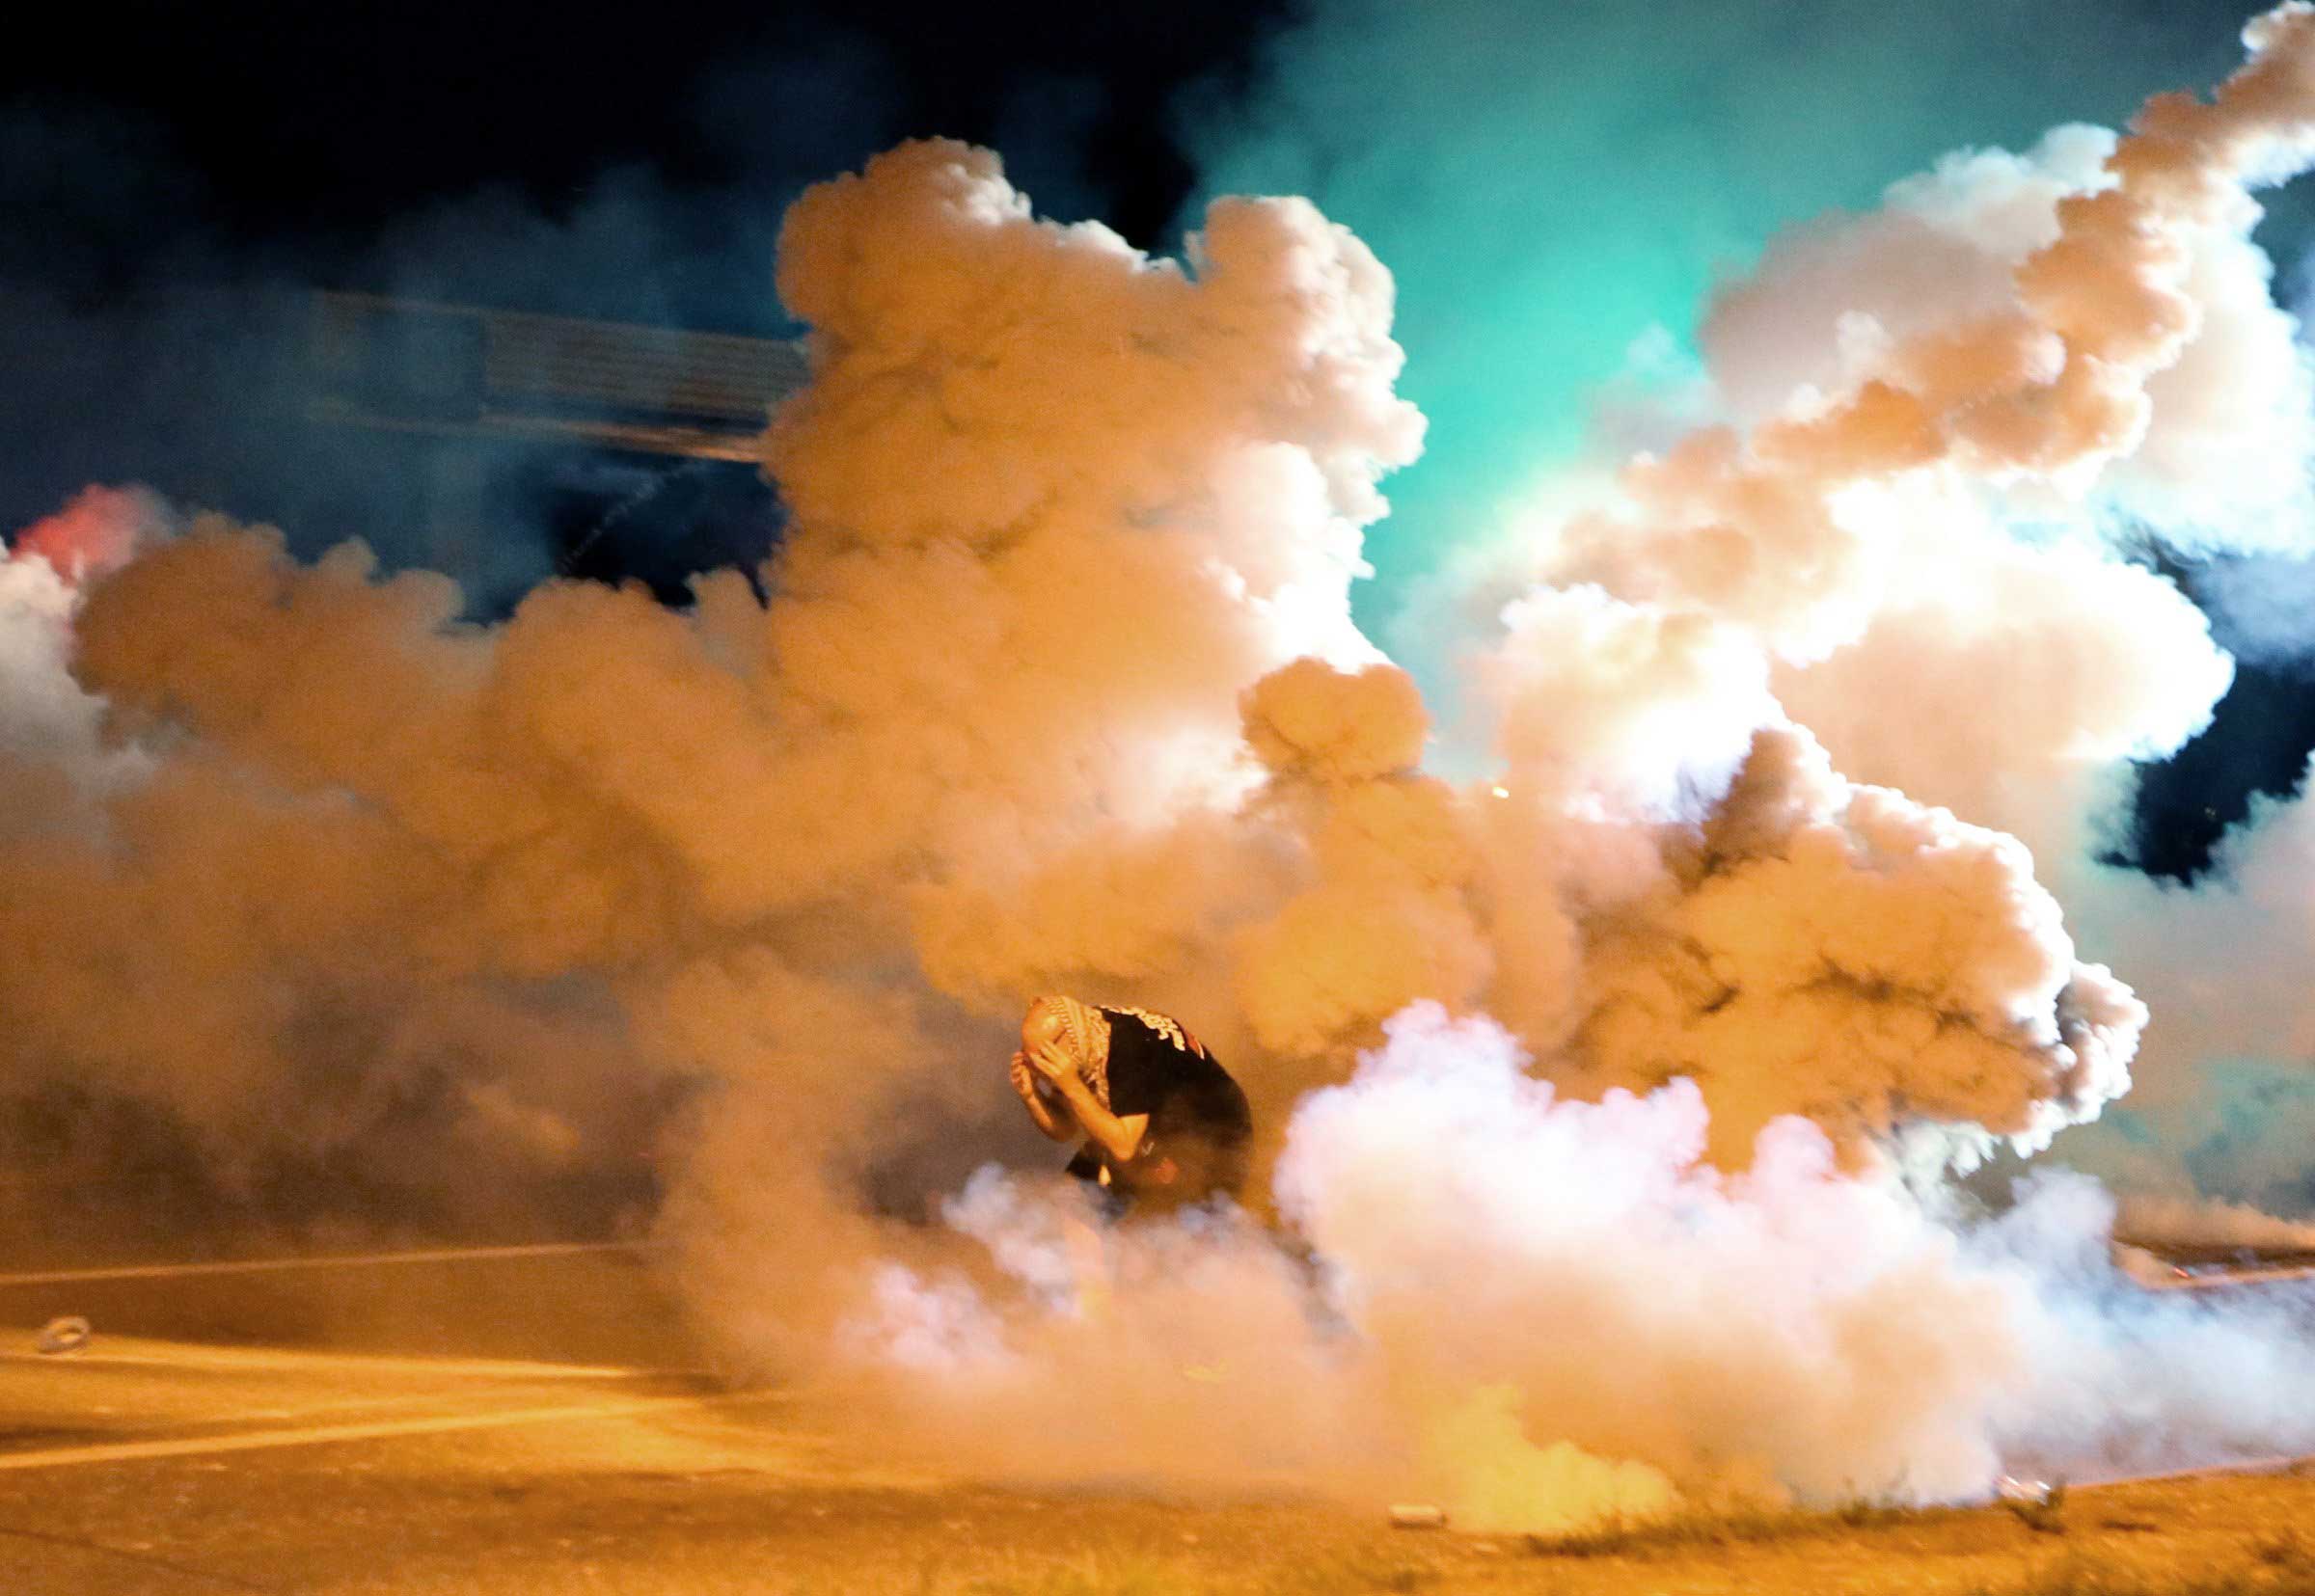 Aug. 13, 2014. A protester takes shelter from smoke billowing around him in Freguson, Mo. Protests in the St. Louis suburb rocked by racial unrest since a white police officer shot an unarmed black teenager to death turned violent Wednesday night, with some people lobbing Molotov cocktails and other objects at police who responded with smoke bombs and tear gas to disperse the crowd.